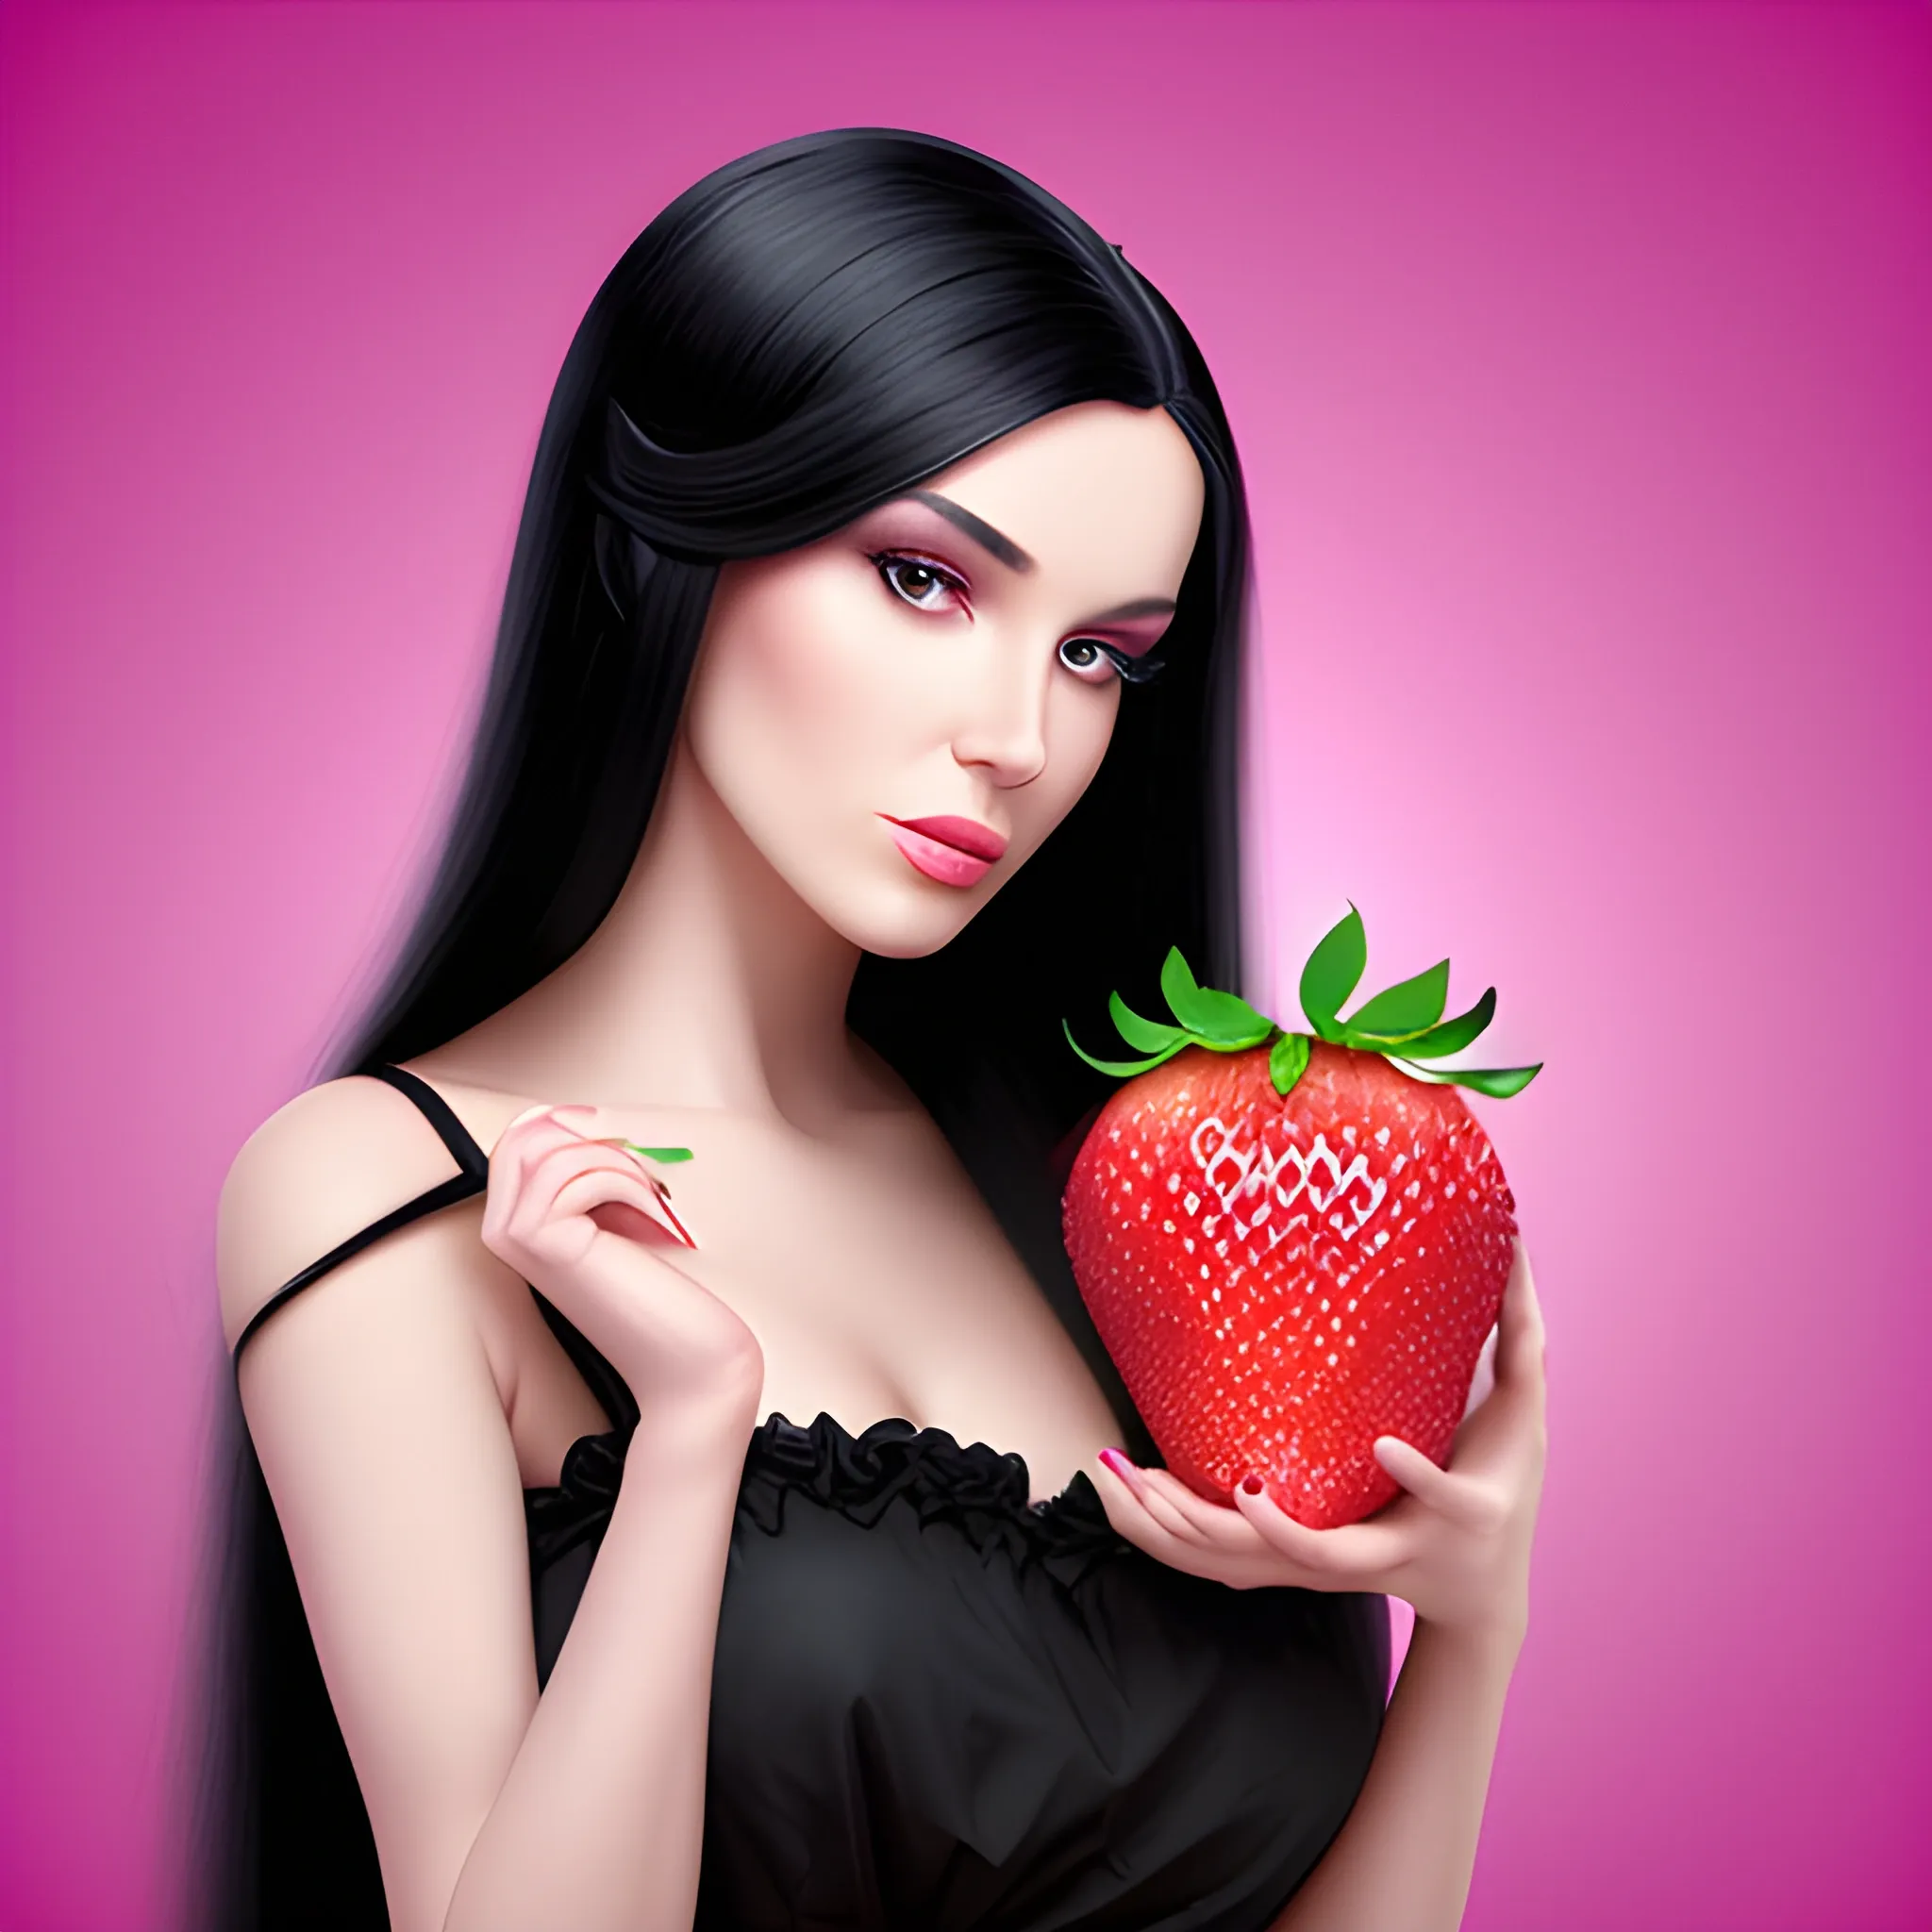 beautiful woman with long black hair wearing a black dress stands on a pink background and eats a large strawberry, 3D